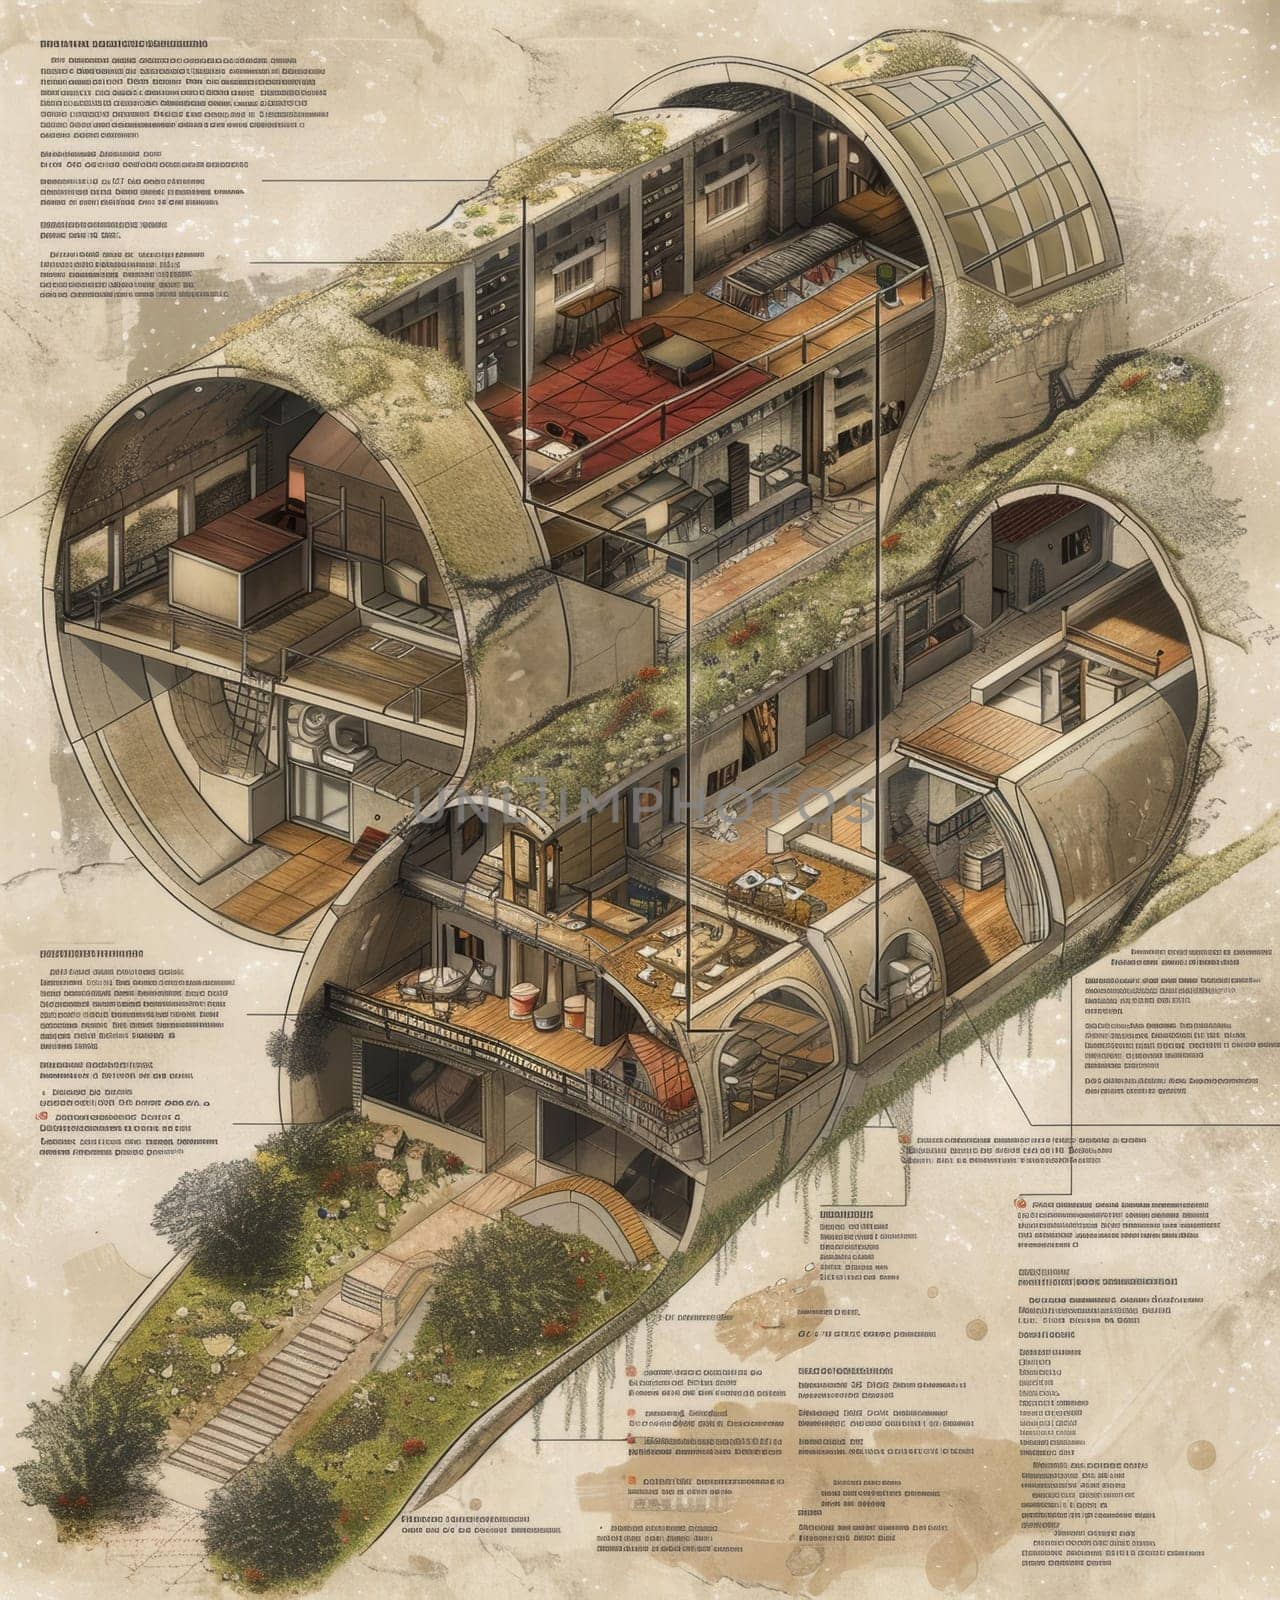 A vintage-style cross-section depicting an ecologically designed earthship with lush green roofing and multiple sustainable living spaces